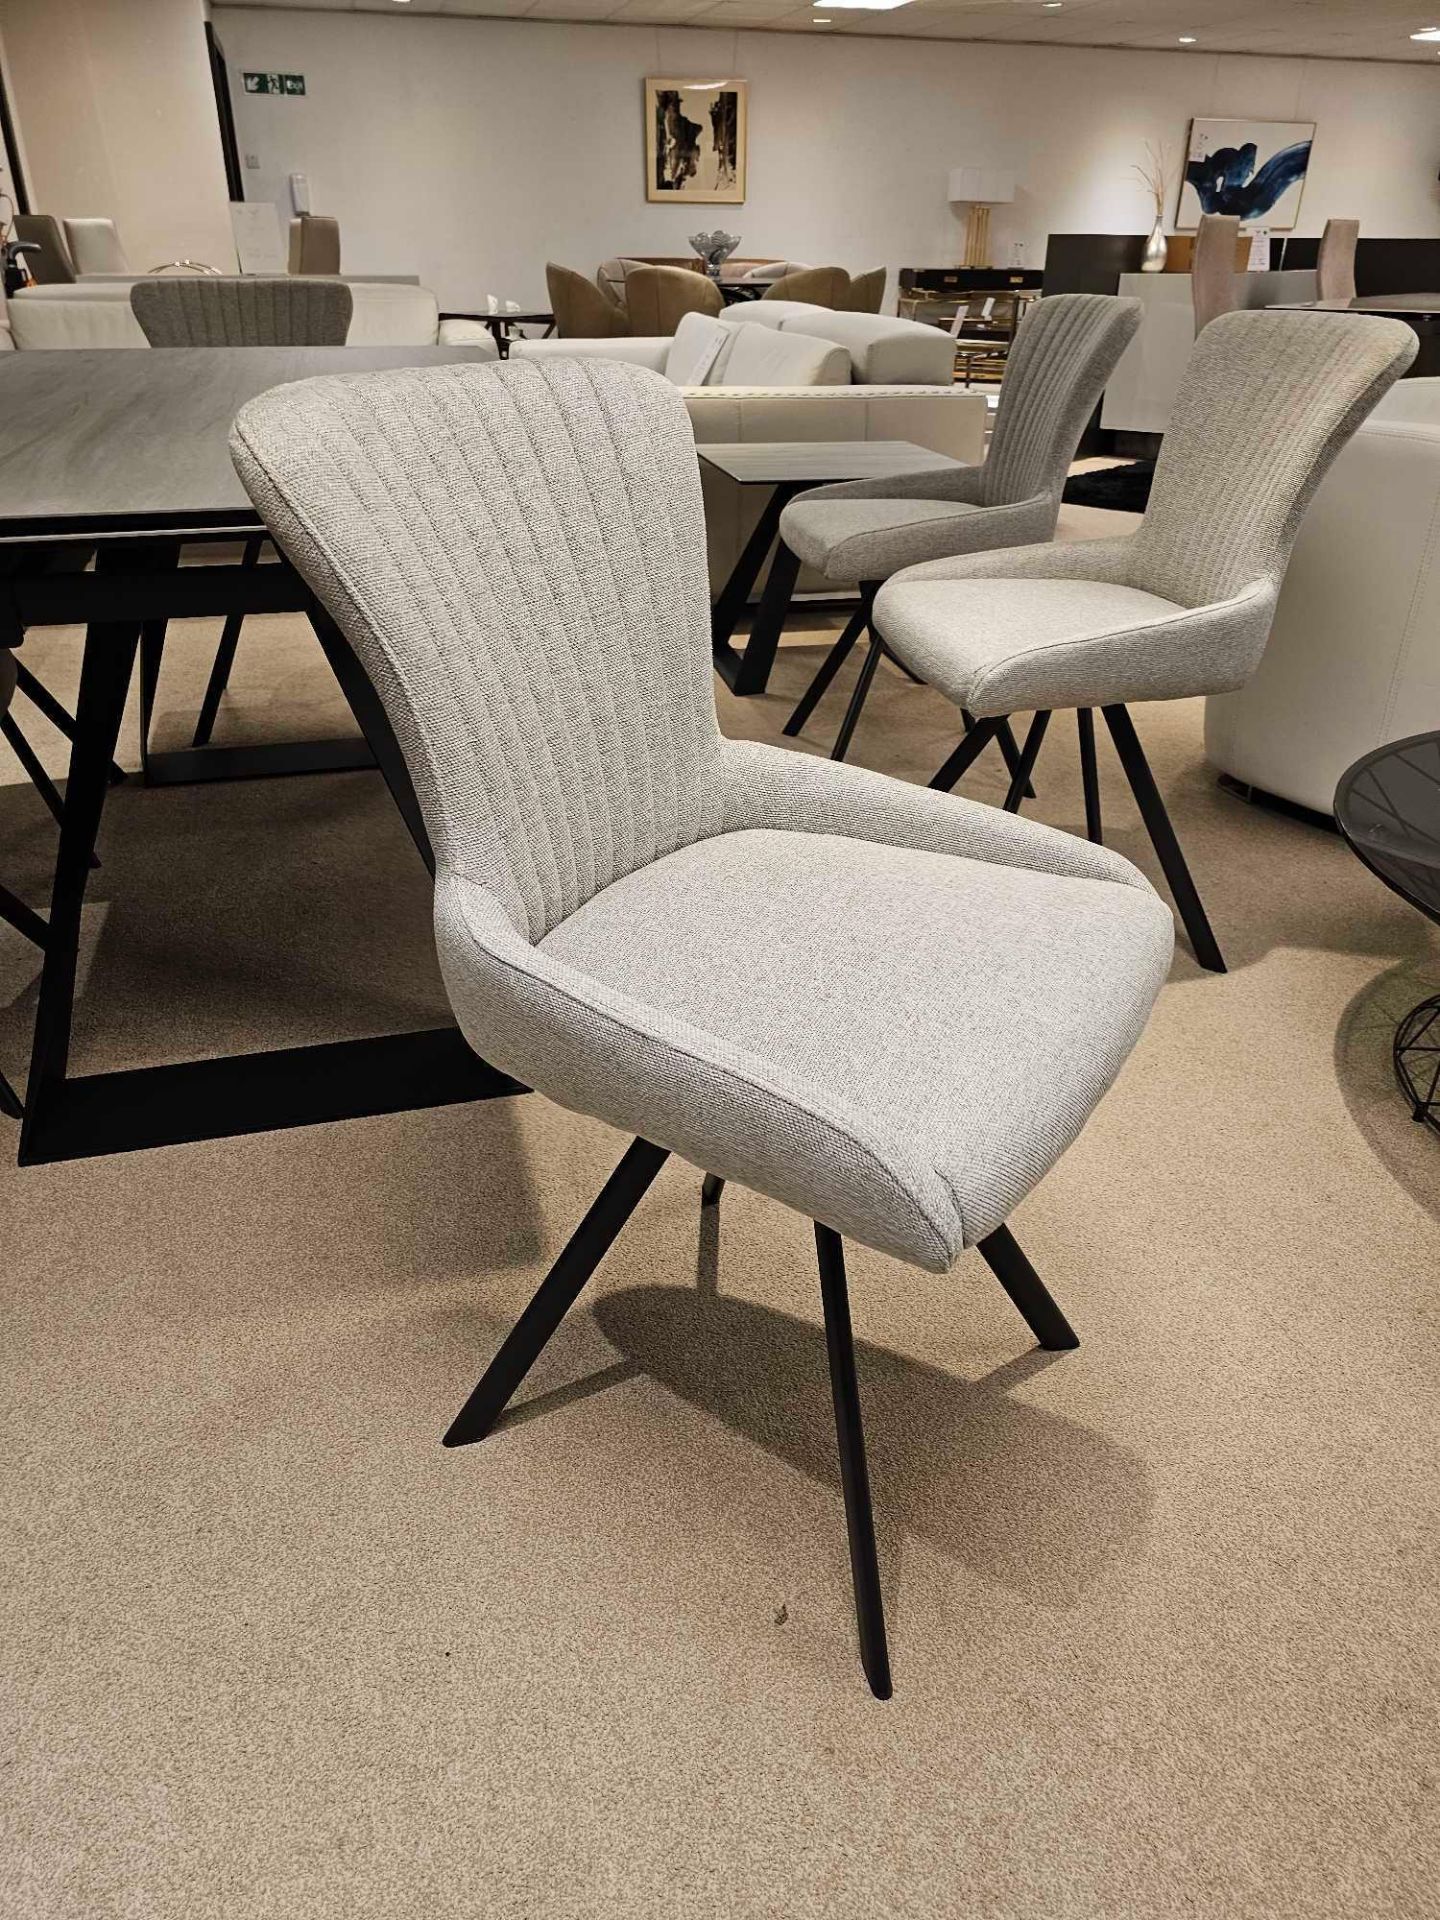 A Set of 6 x Maria Chairs by Kesterport Maria has the same self-return mechanism as many of the - Image 2 of 6